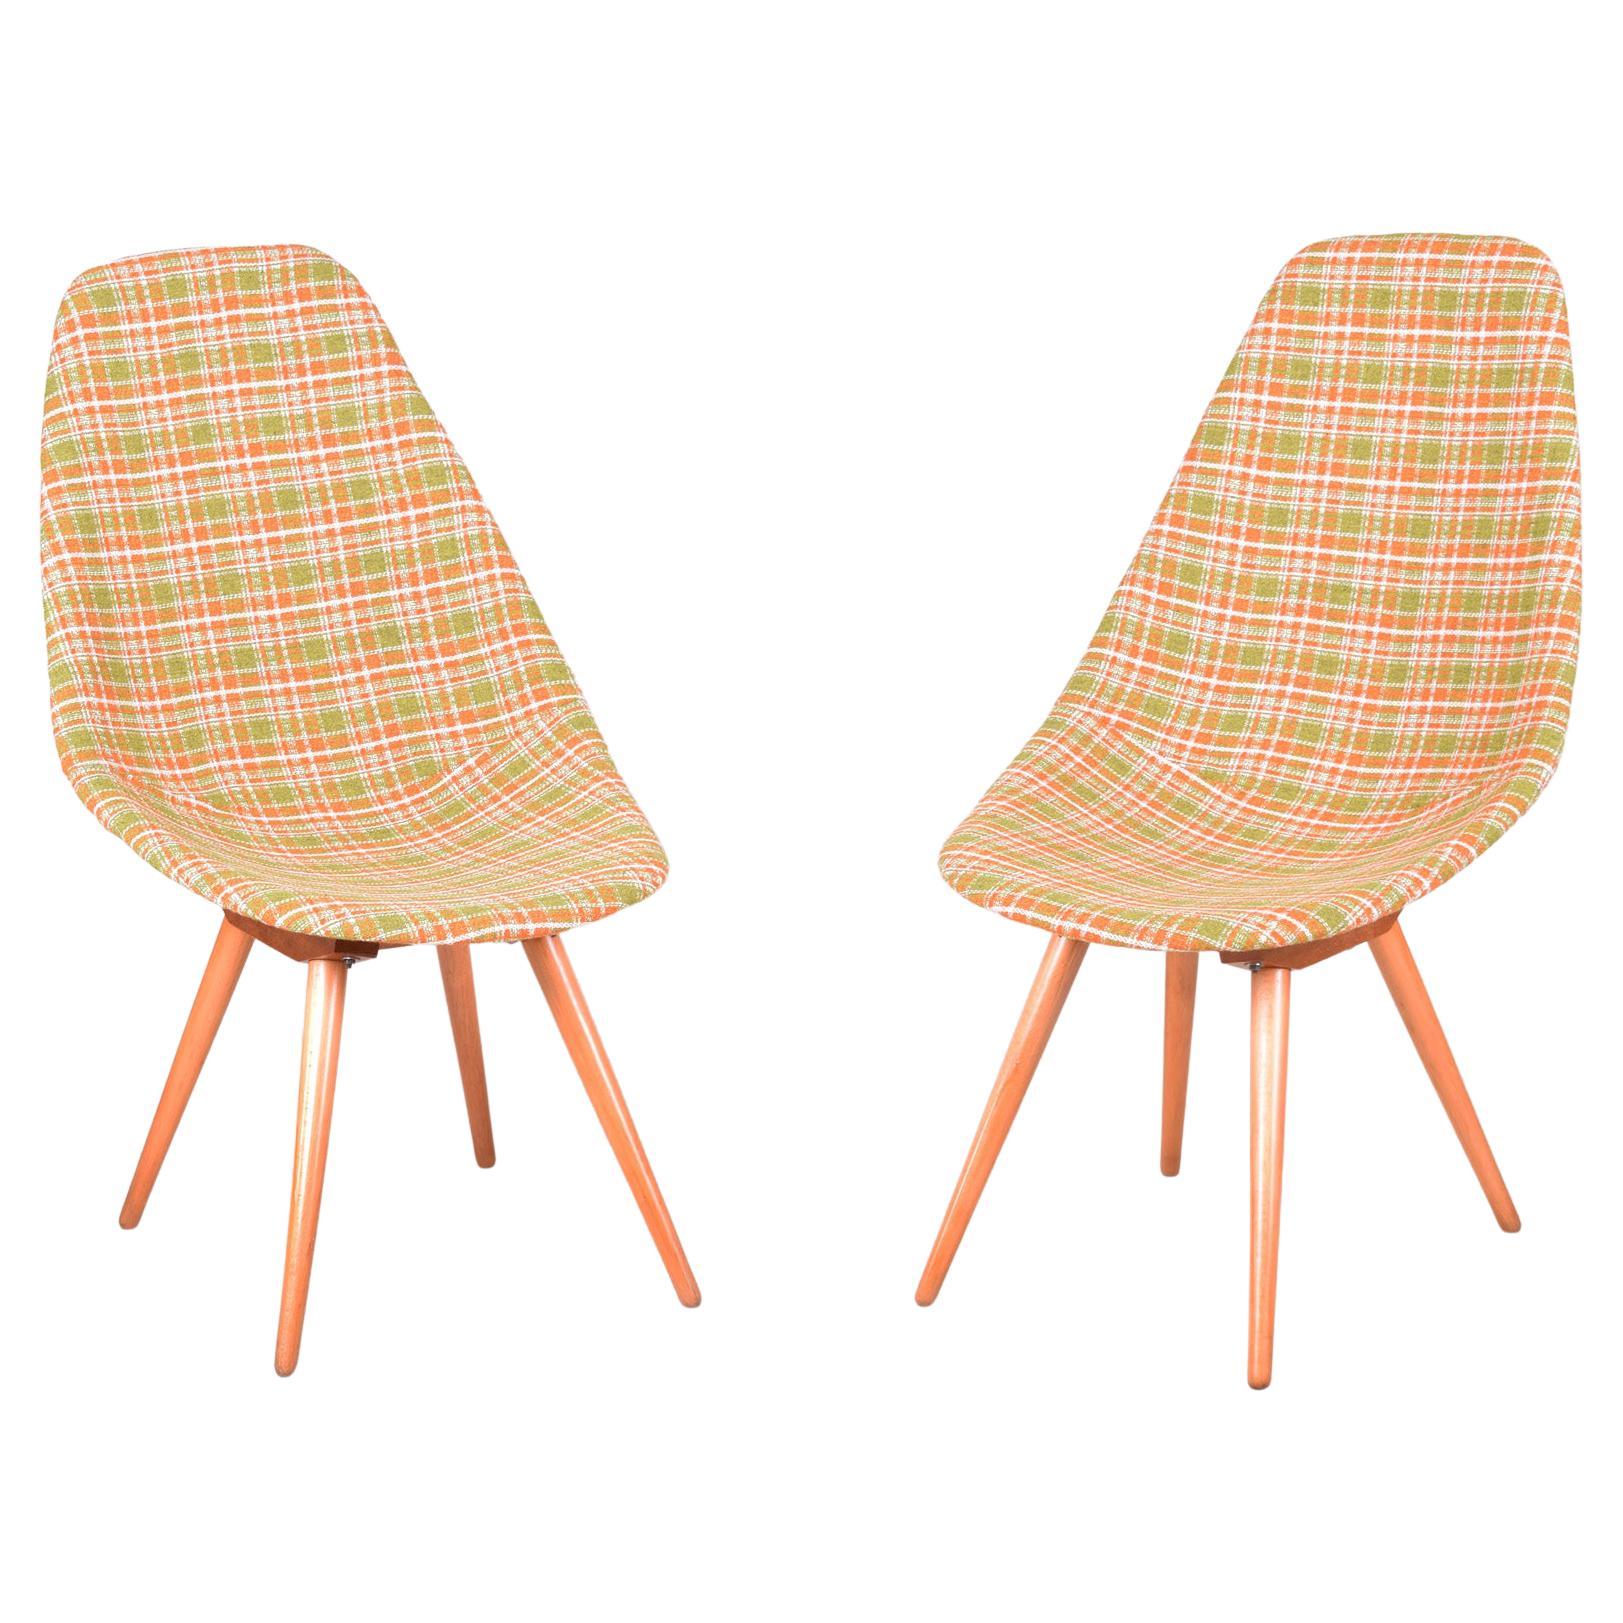 Restored Pair of Czech Midcentury Chairs, 1950-1960, Made Out of Beech & Fabric For Sale